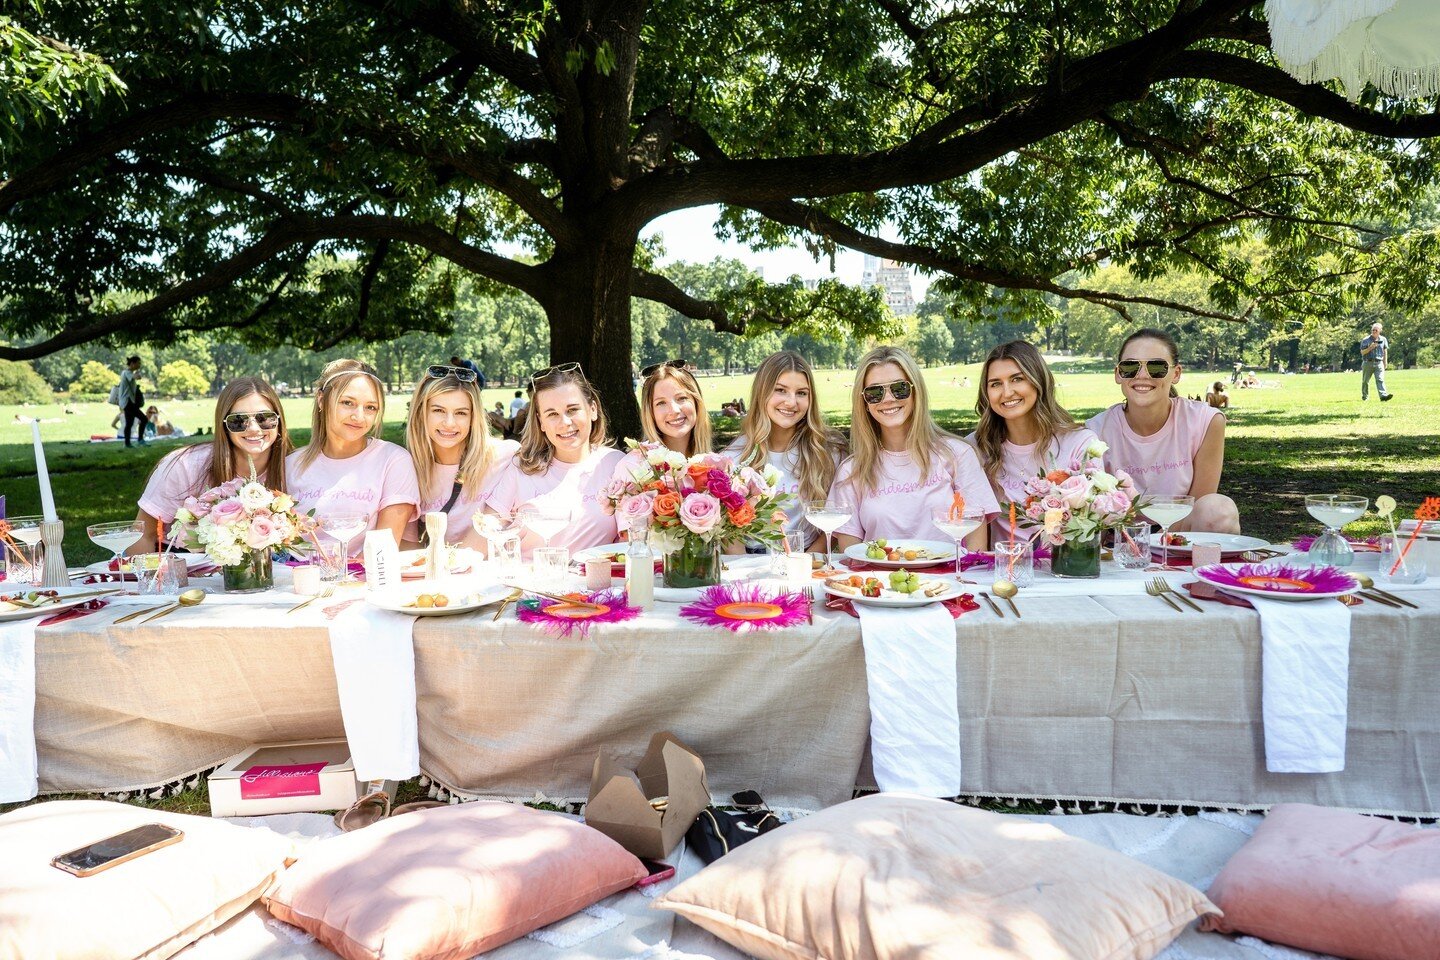 It was a bachelorette lunch fit for the loveliest bride-to-be! The excellent company of friends, a beautiful lunch, and the grand scenery of Central Park made this day extra special for our amazing Callie! 💕⁠
⁠
Thank you to all the vendors who helpe